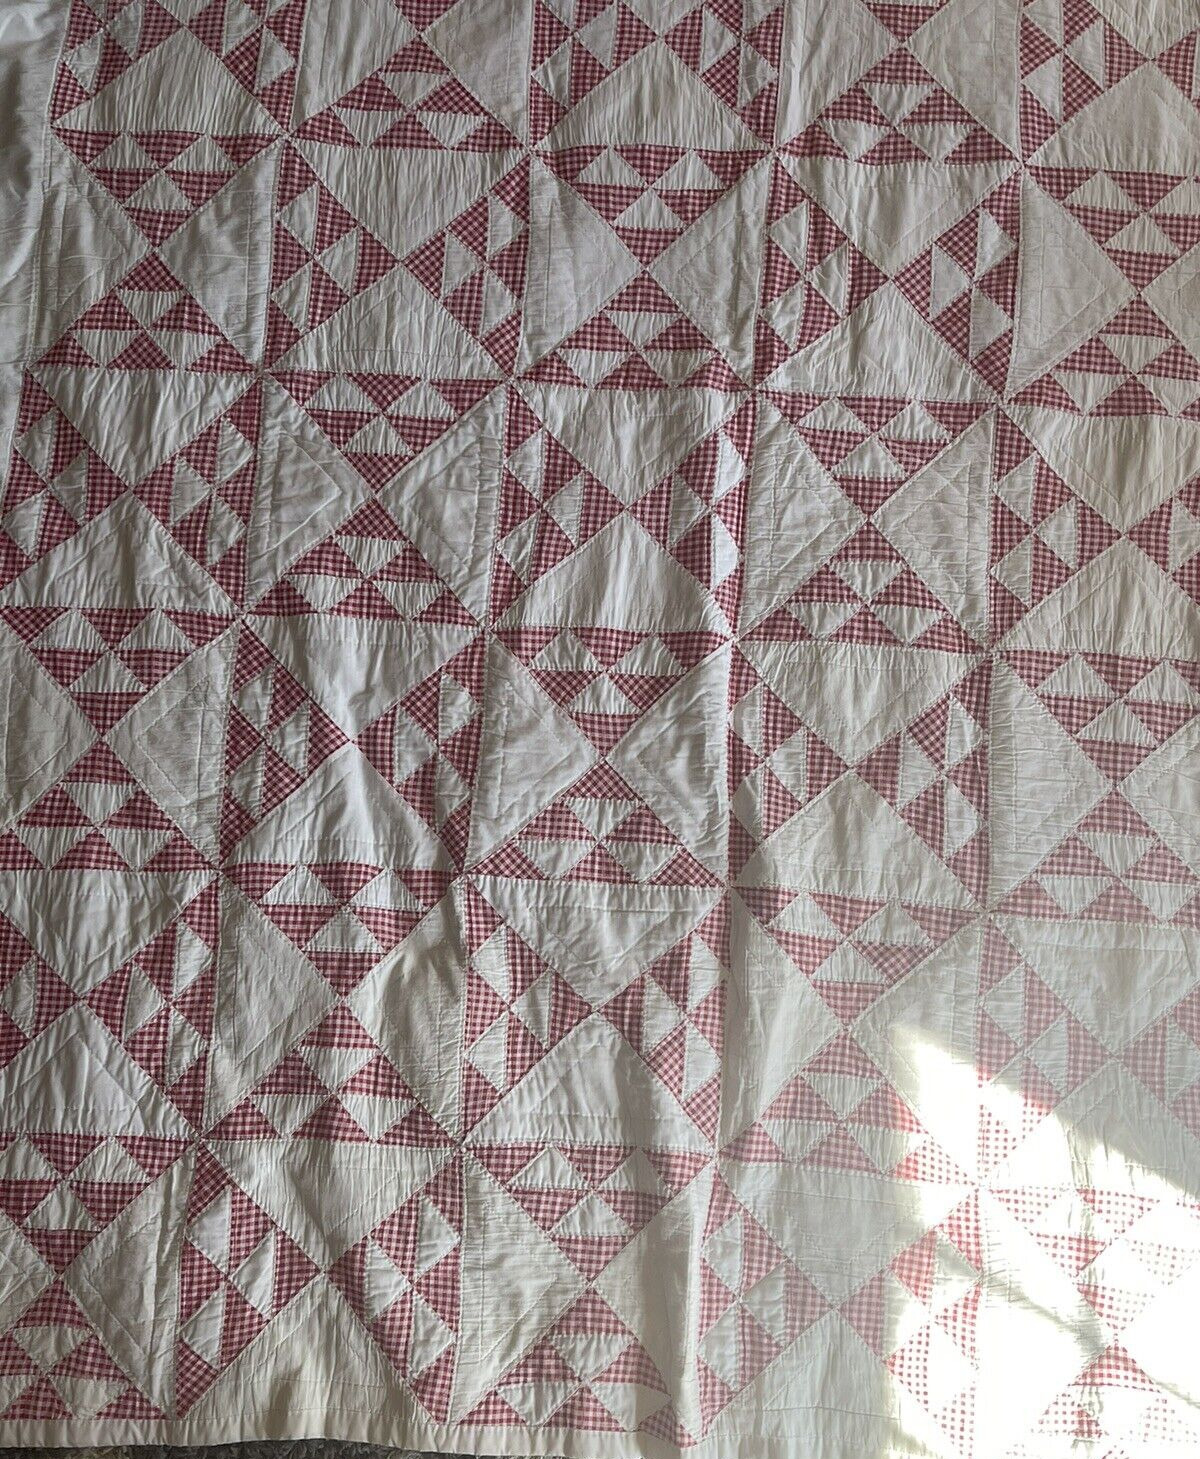 Antique Red & White Gingham  Patchwork Quilt Hand Quilted  1930's Lot B